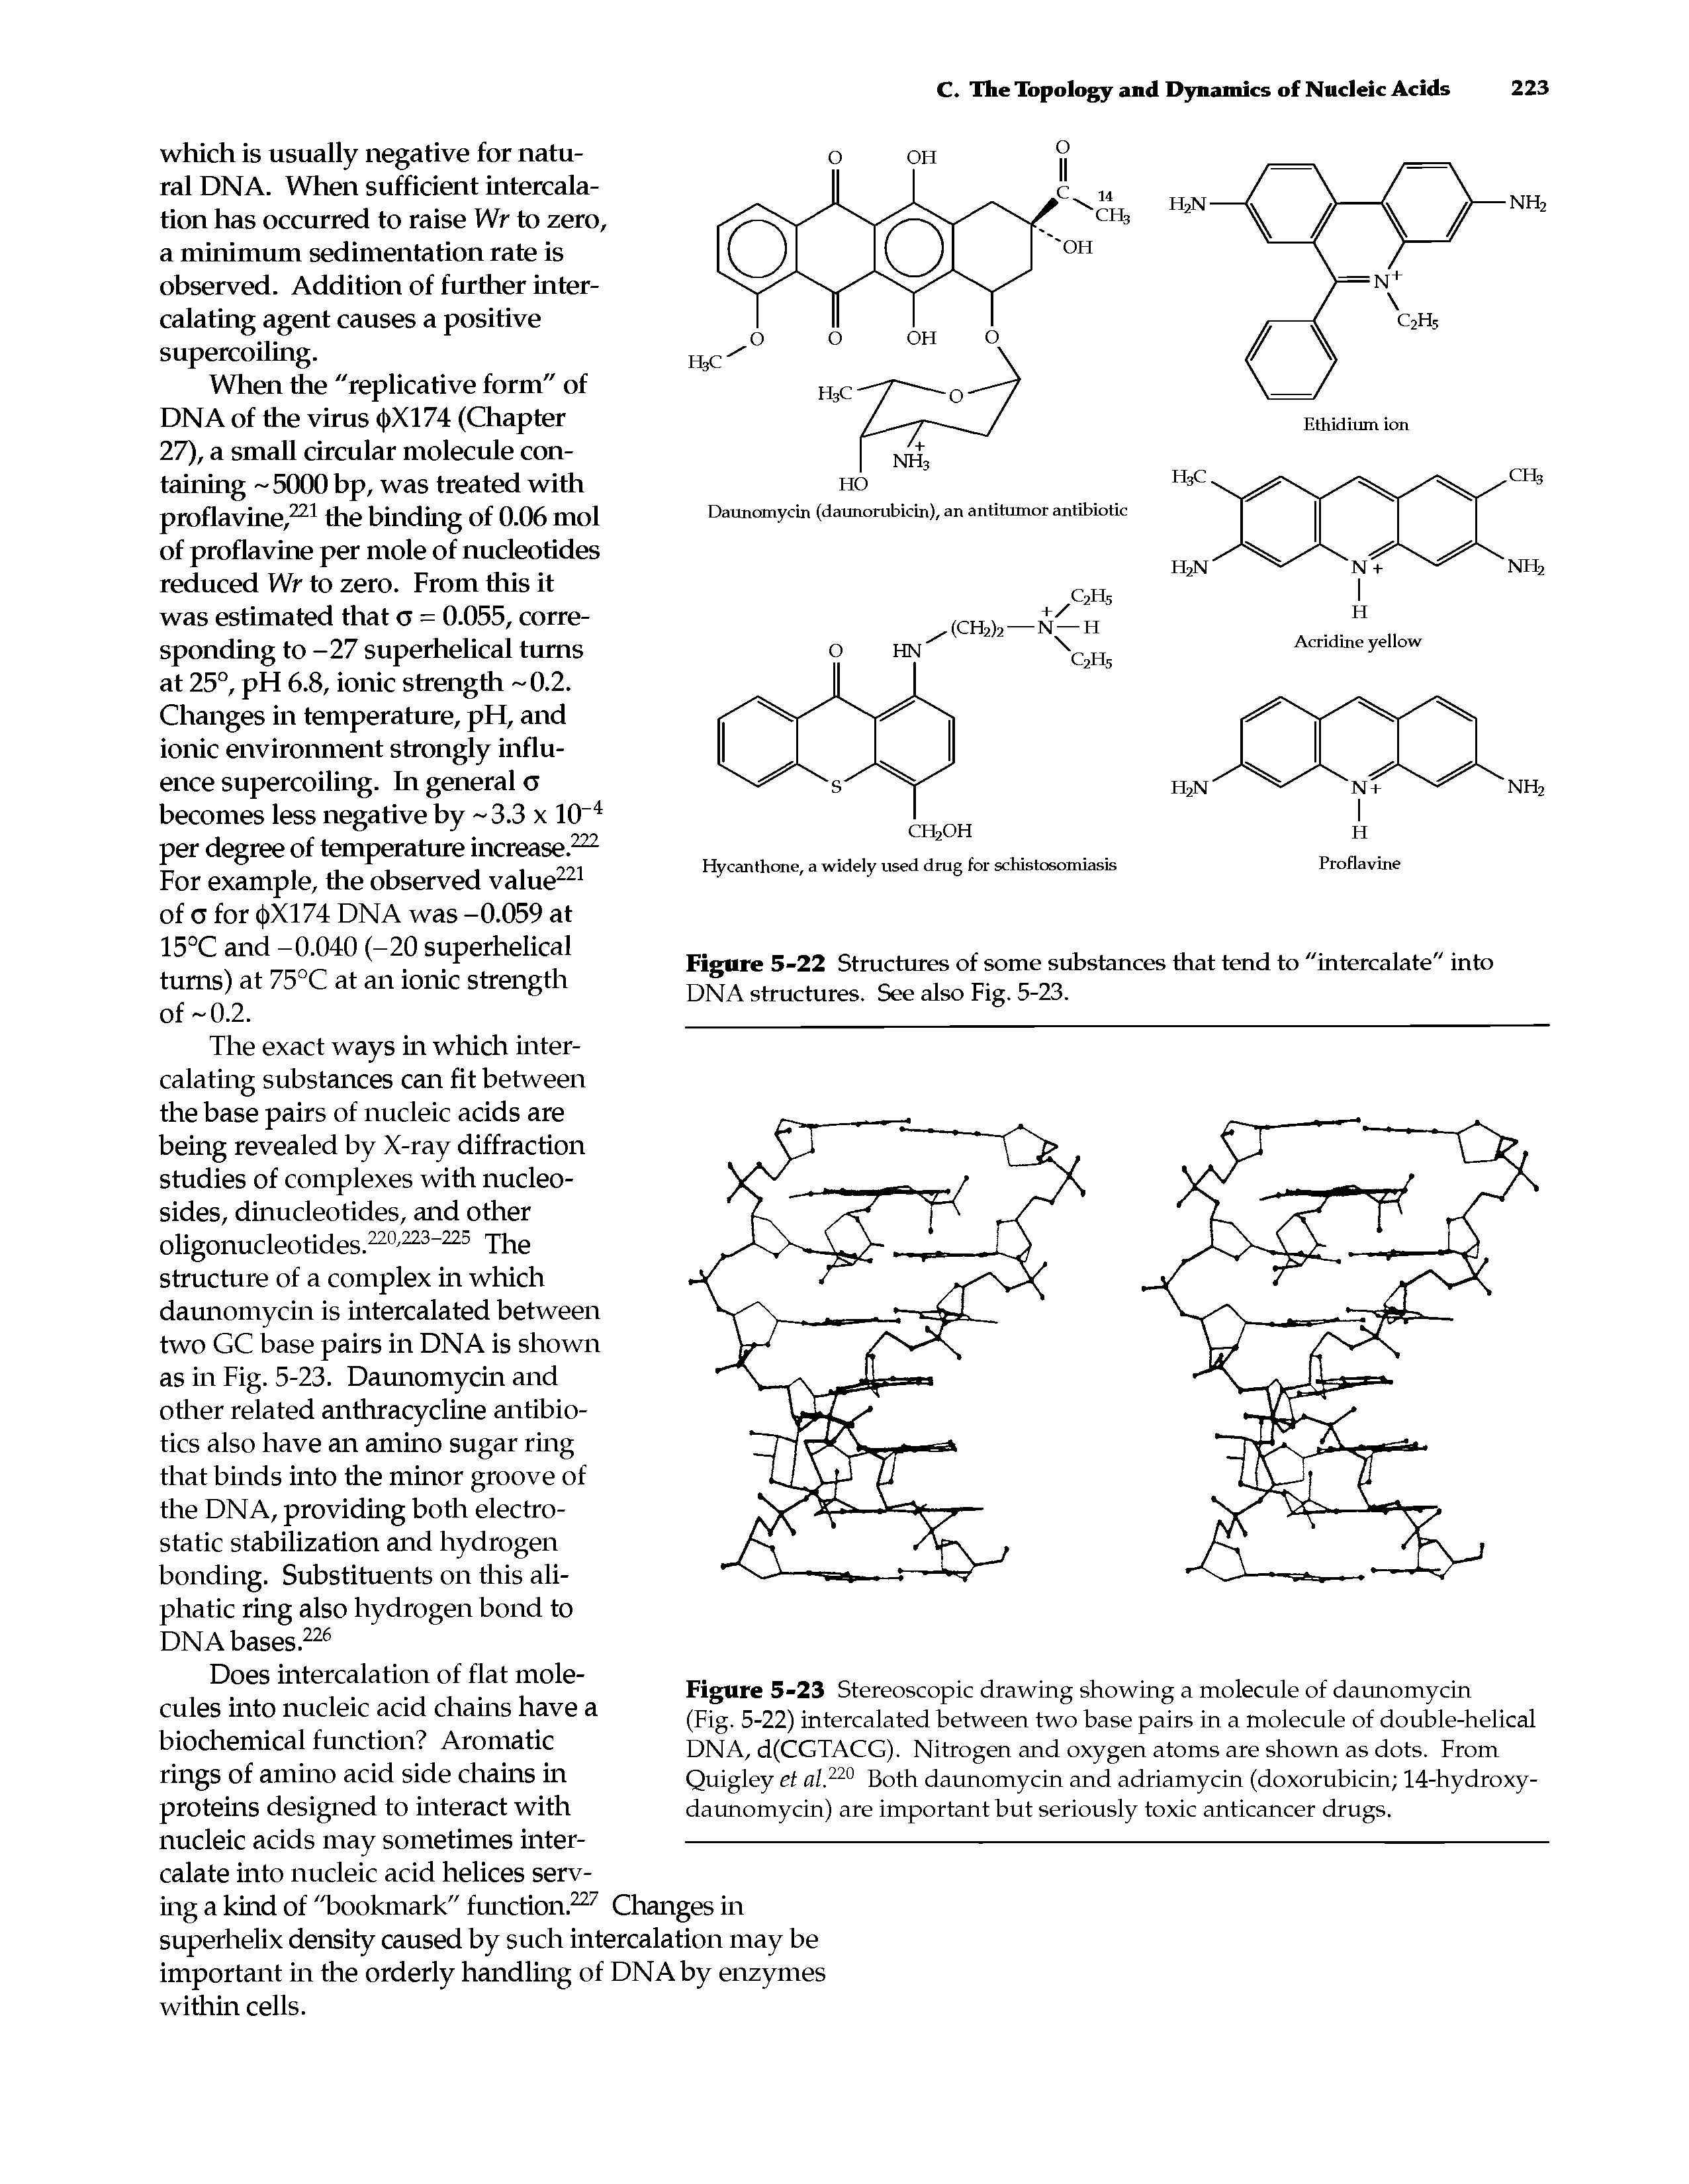 Figure 5-22 Structures of some substances that tend to "intercalate" into DNA structures. See also Fig. 5-23.